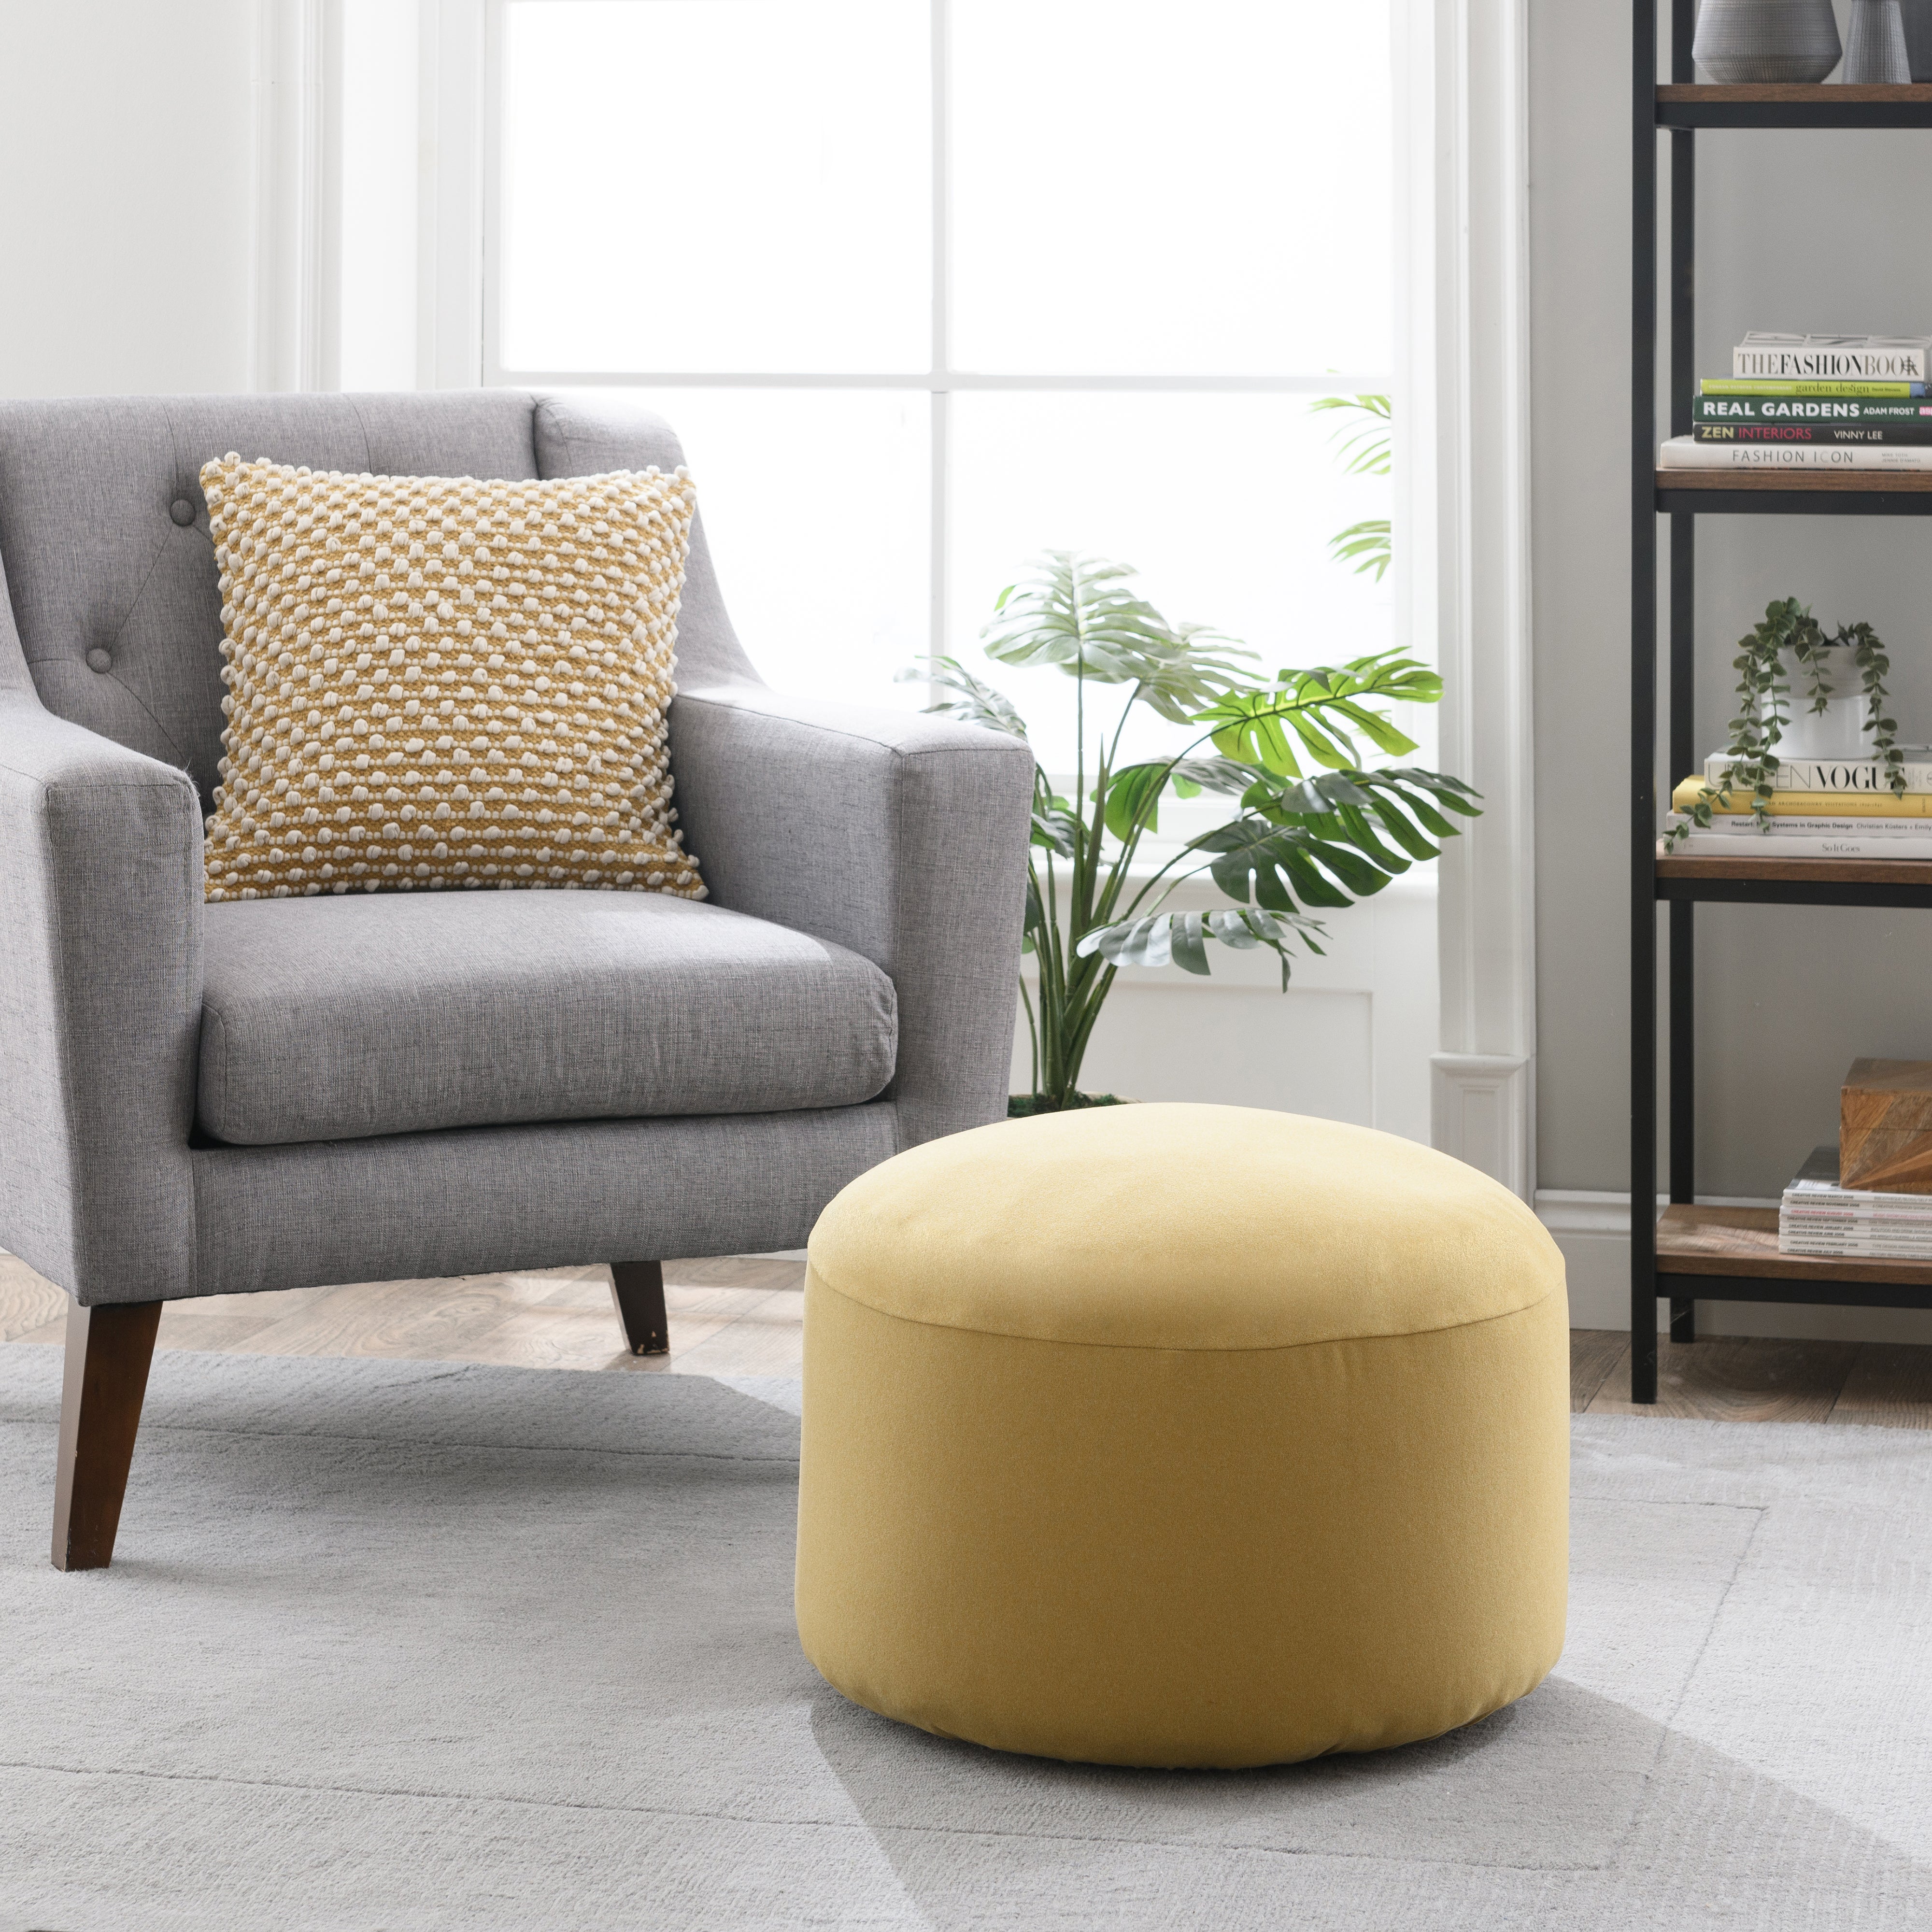 Soft Marl Pouffe Cover Old Gold